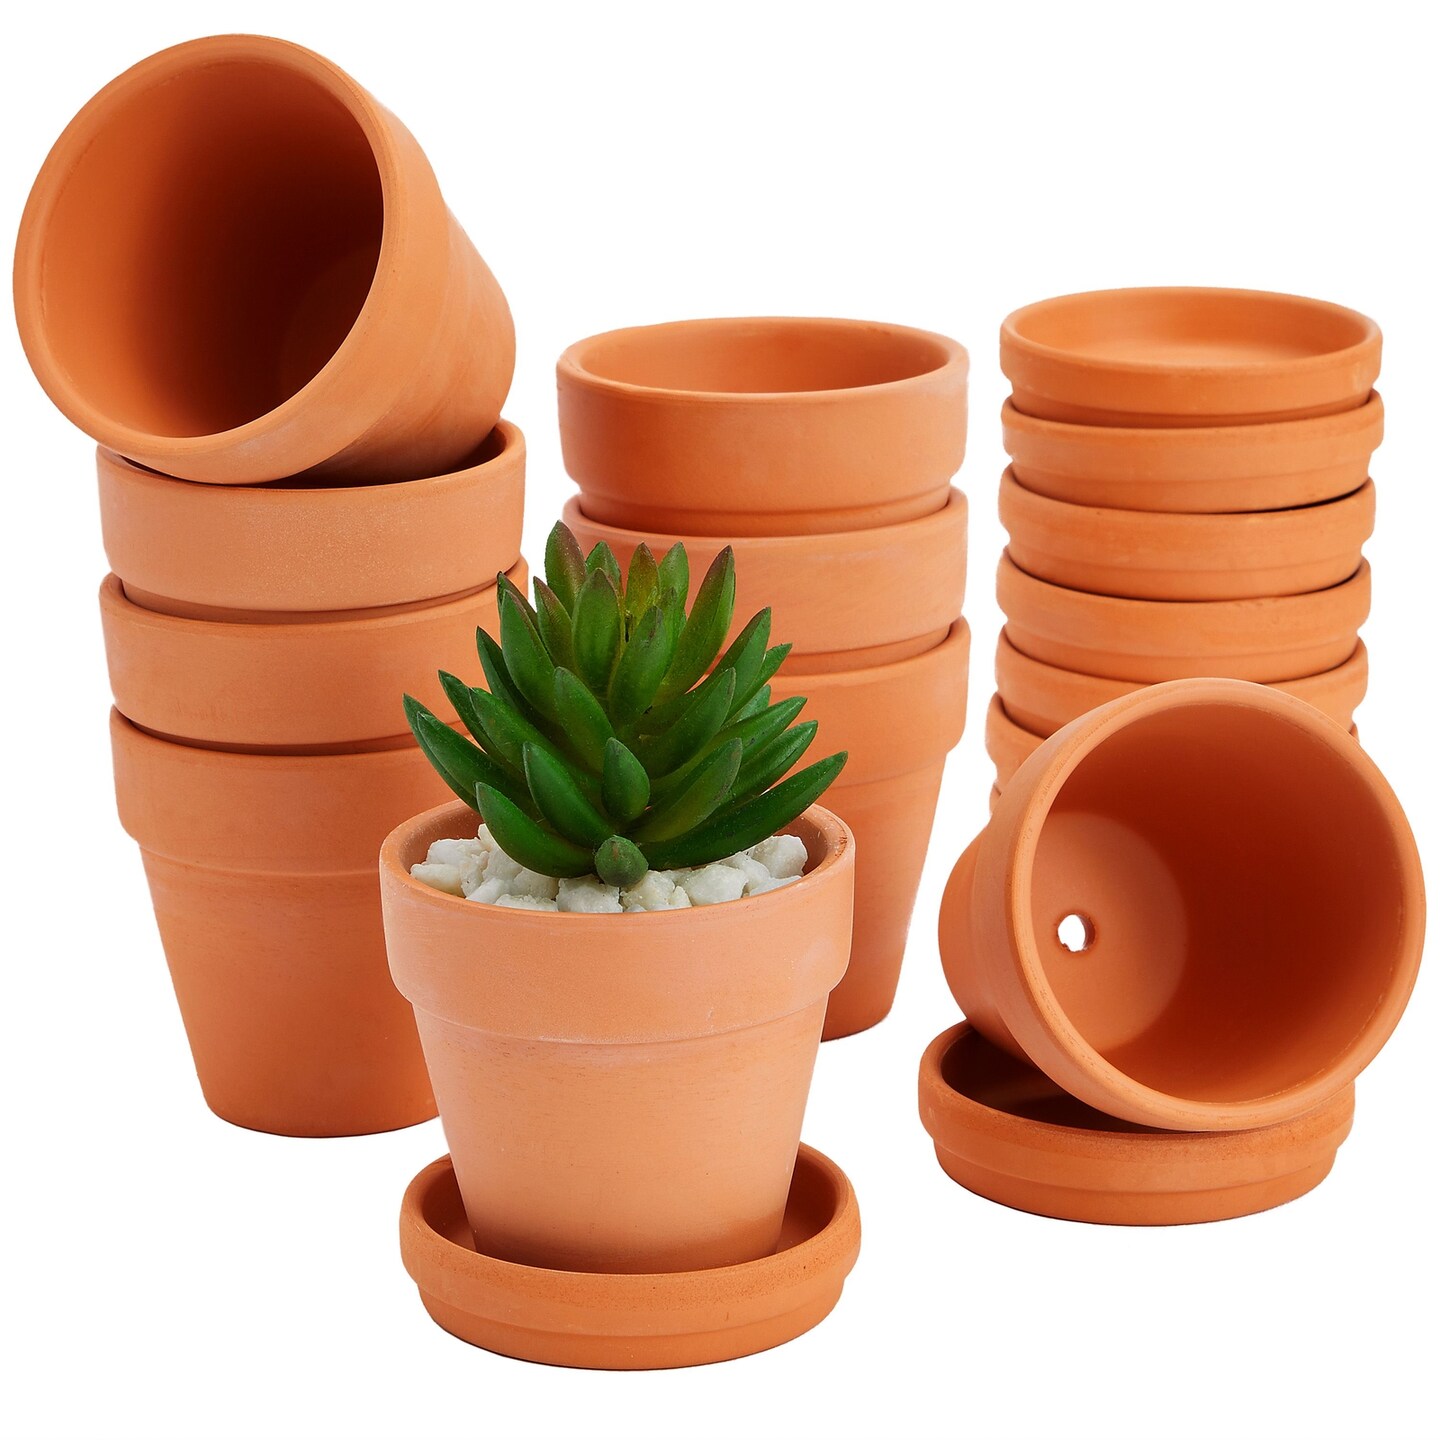 9 Pack Small Terracotta Pots with Saucers for Succulents, Clay Flower Planters with Drainage Holes for Indoor, Outdoor Plants, Cactus, Arts and Crafts Projects (3 in)